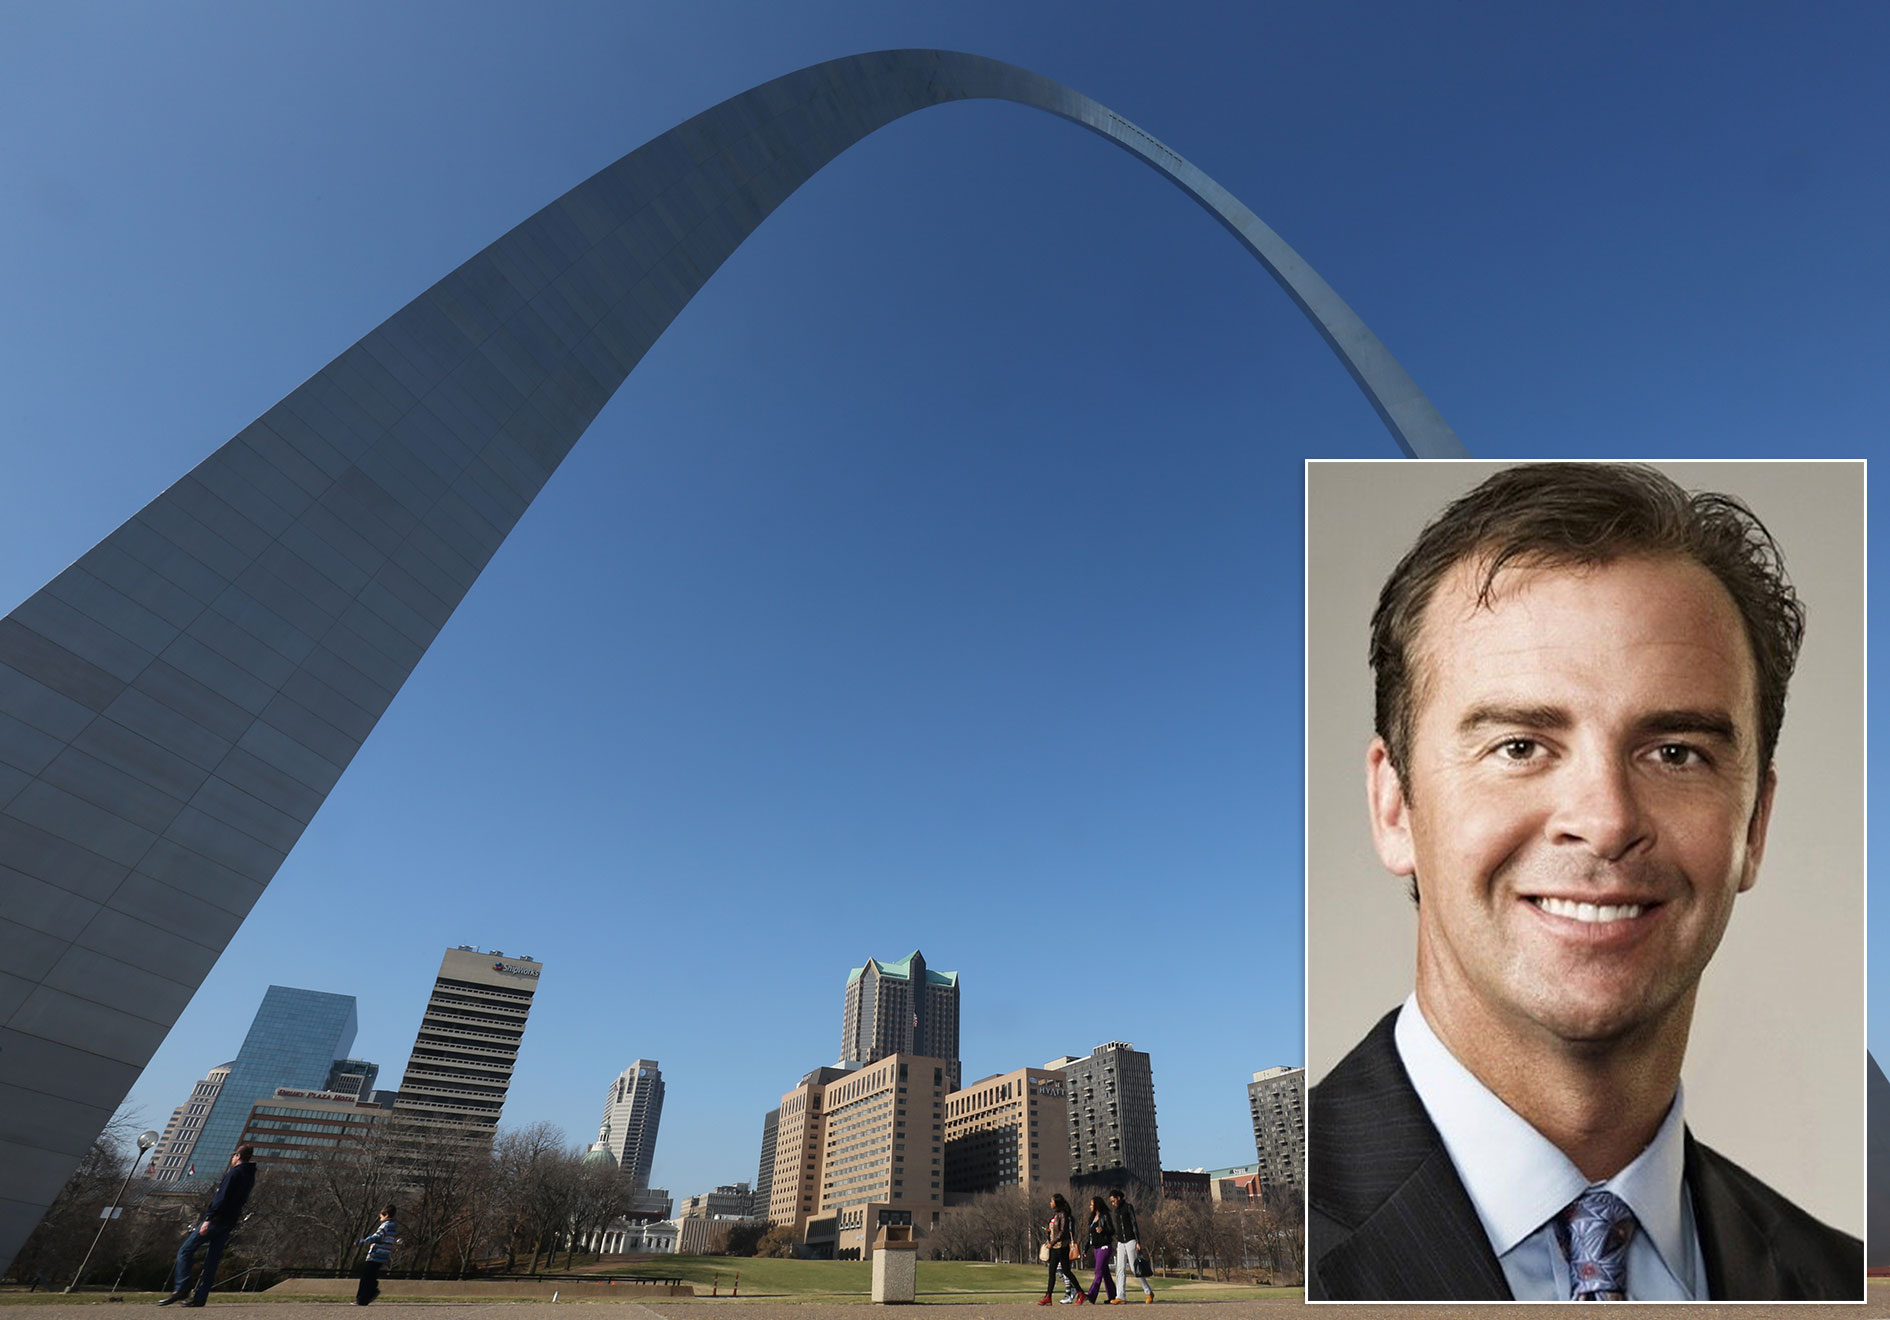 photos of St. Louis arch and banking professional